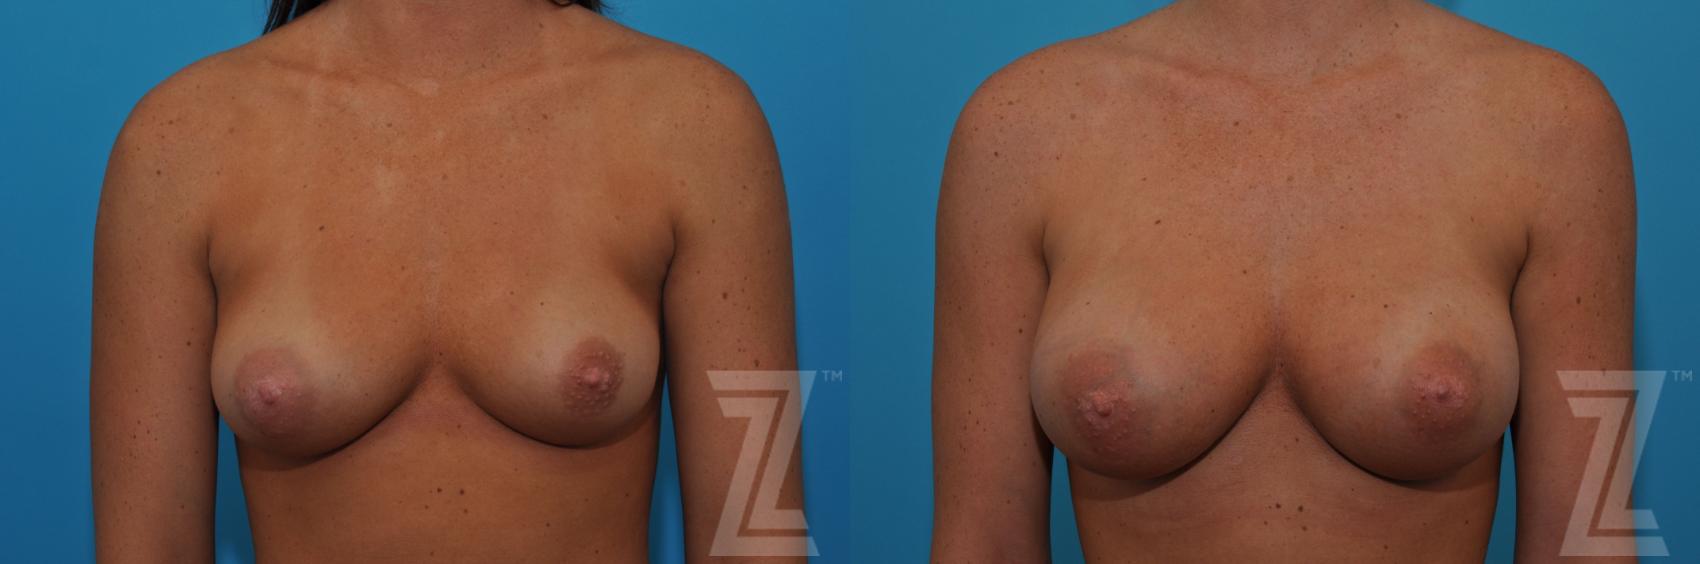 Correction of Breast Asymmetry Before & After Photo | Austin, TX | The Piazza Center for Plastic Surgery & Advanced Skin Care